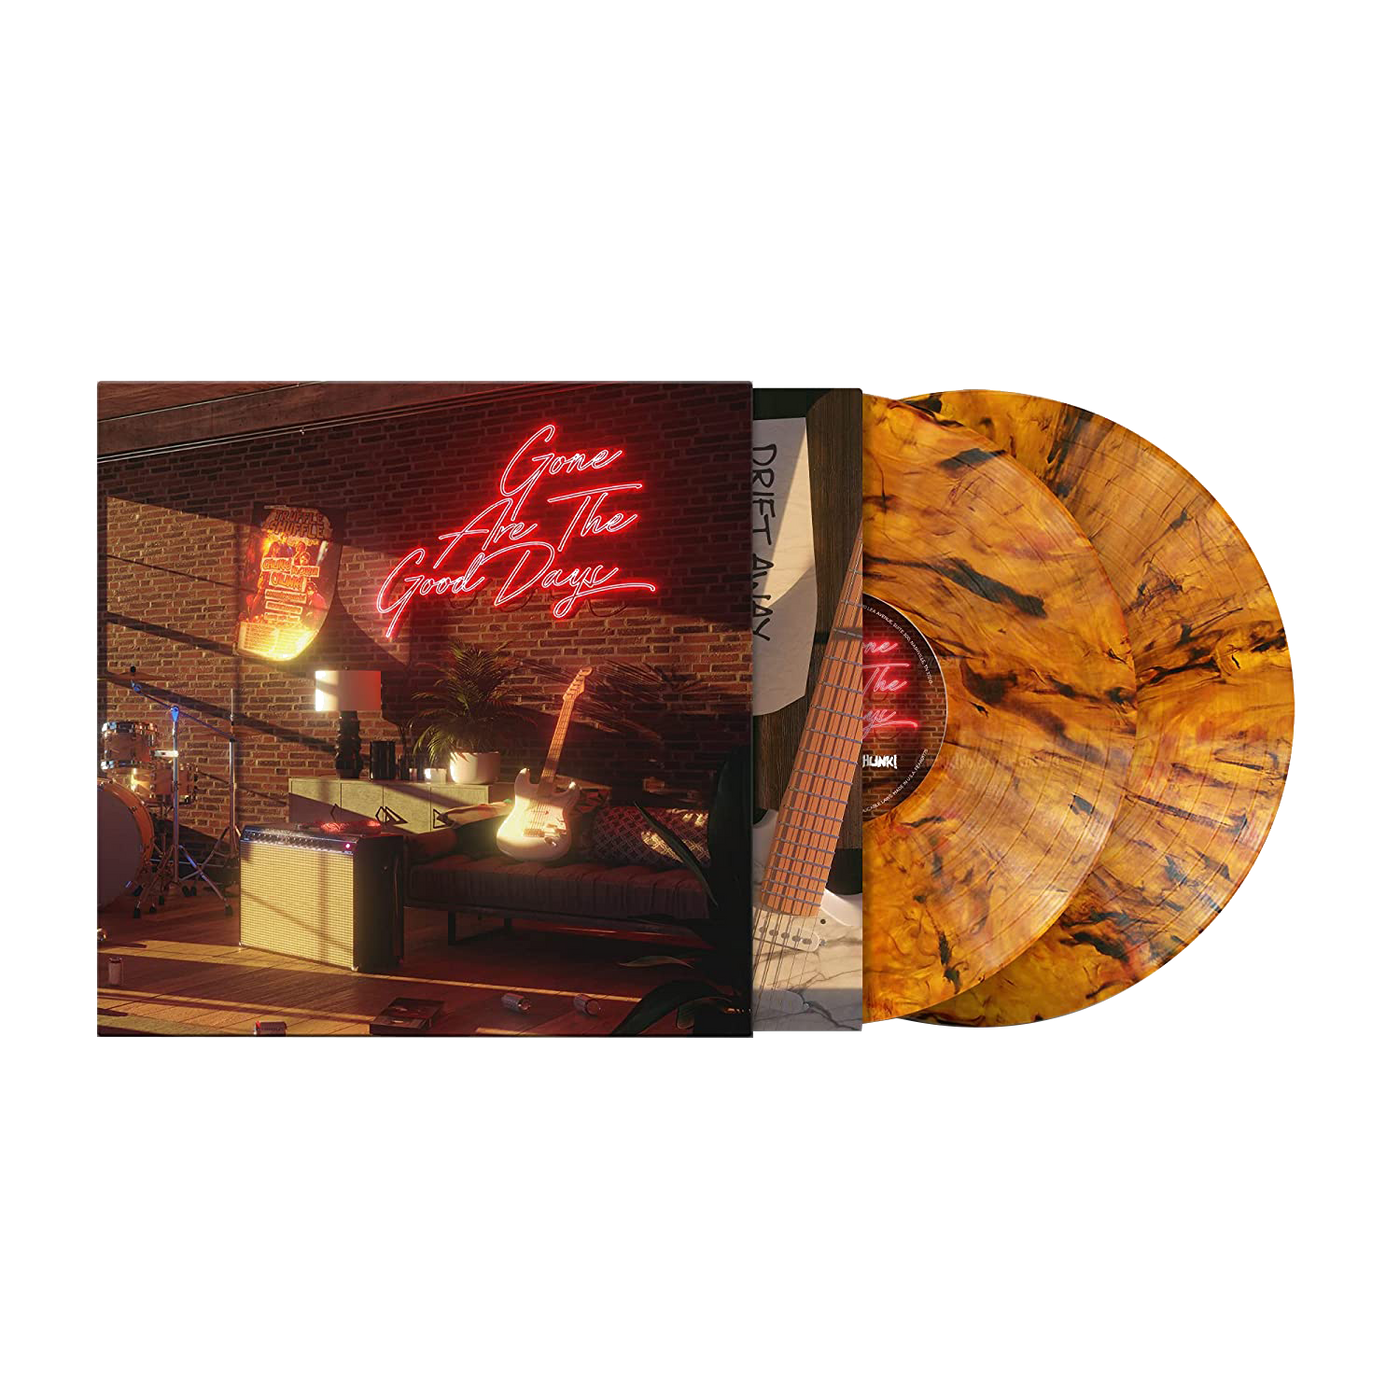 "Gone Are The Good Days" Translucent Tigers Eye Vinyl